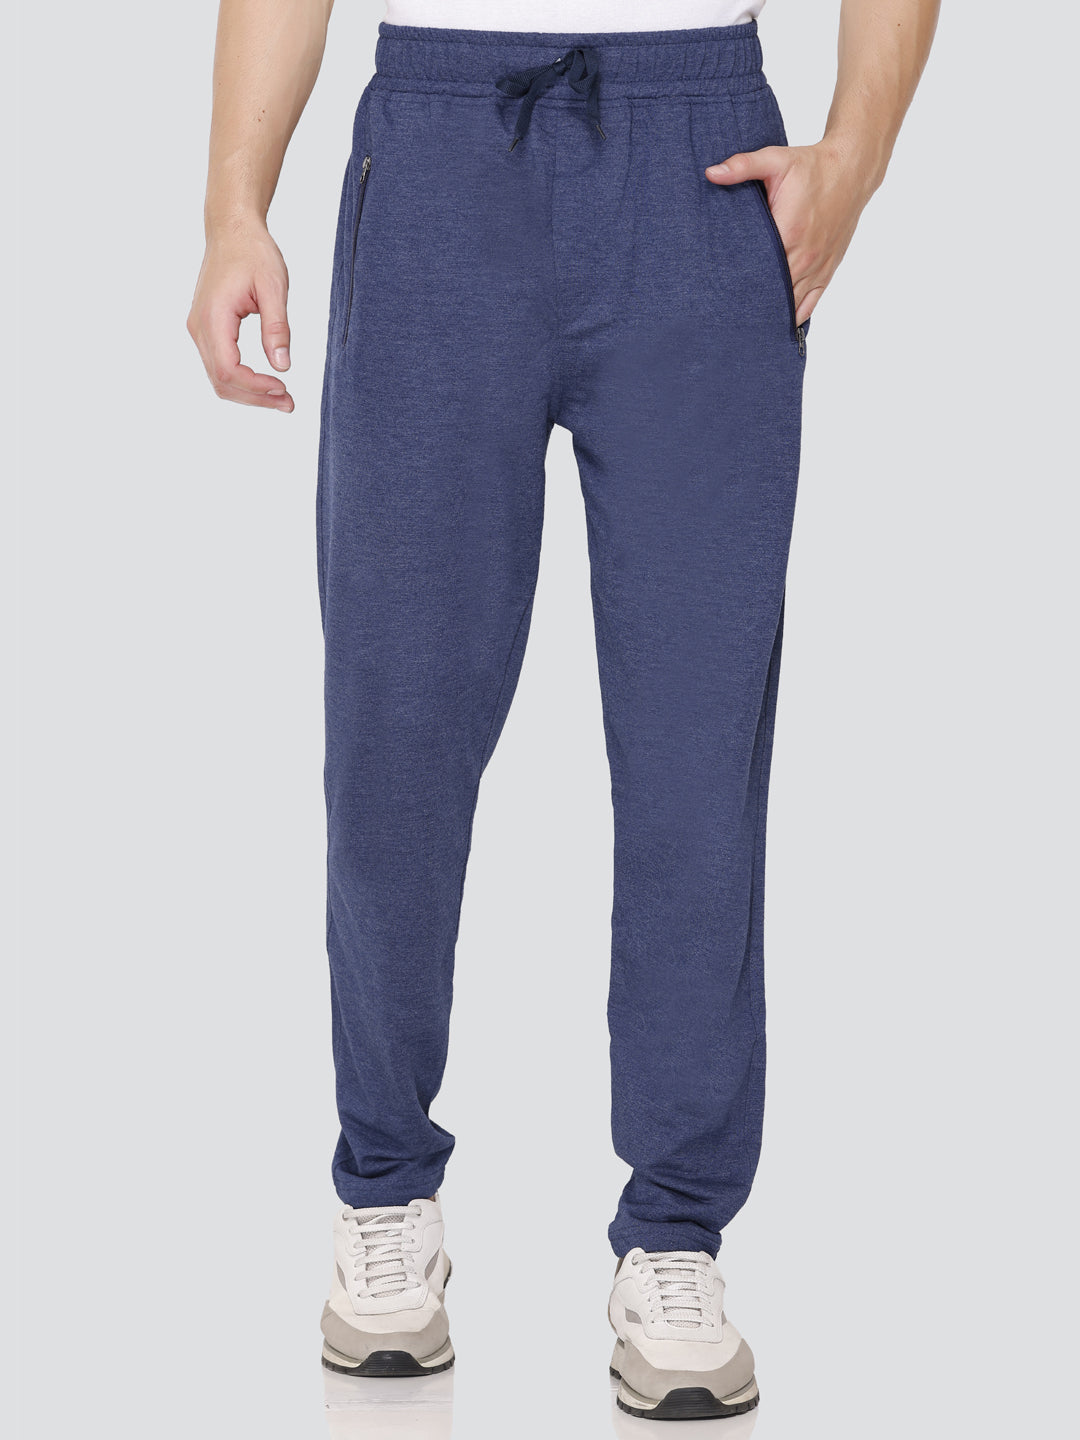 Stylish Jinxer Plus size Men's Cotton Trackpants(M TO 5 XL) online in India 